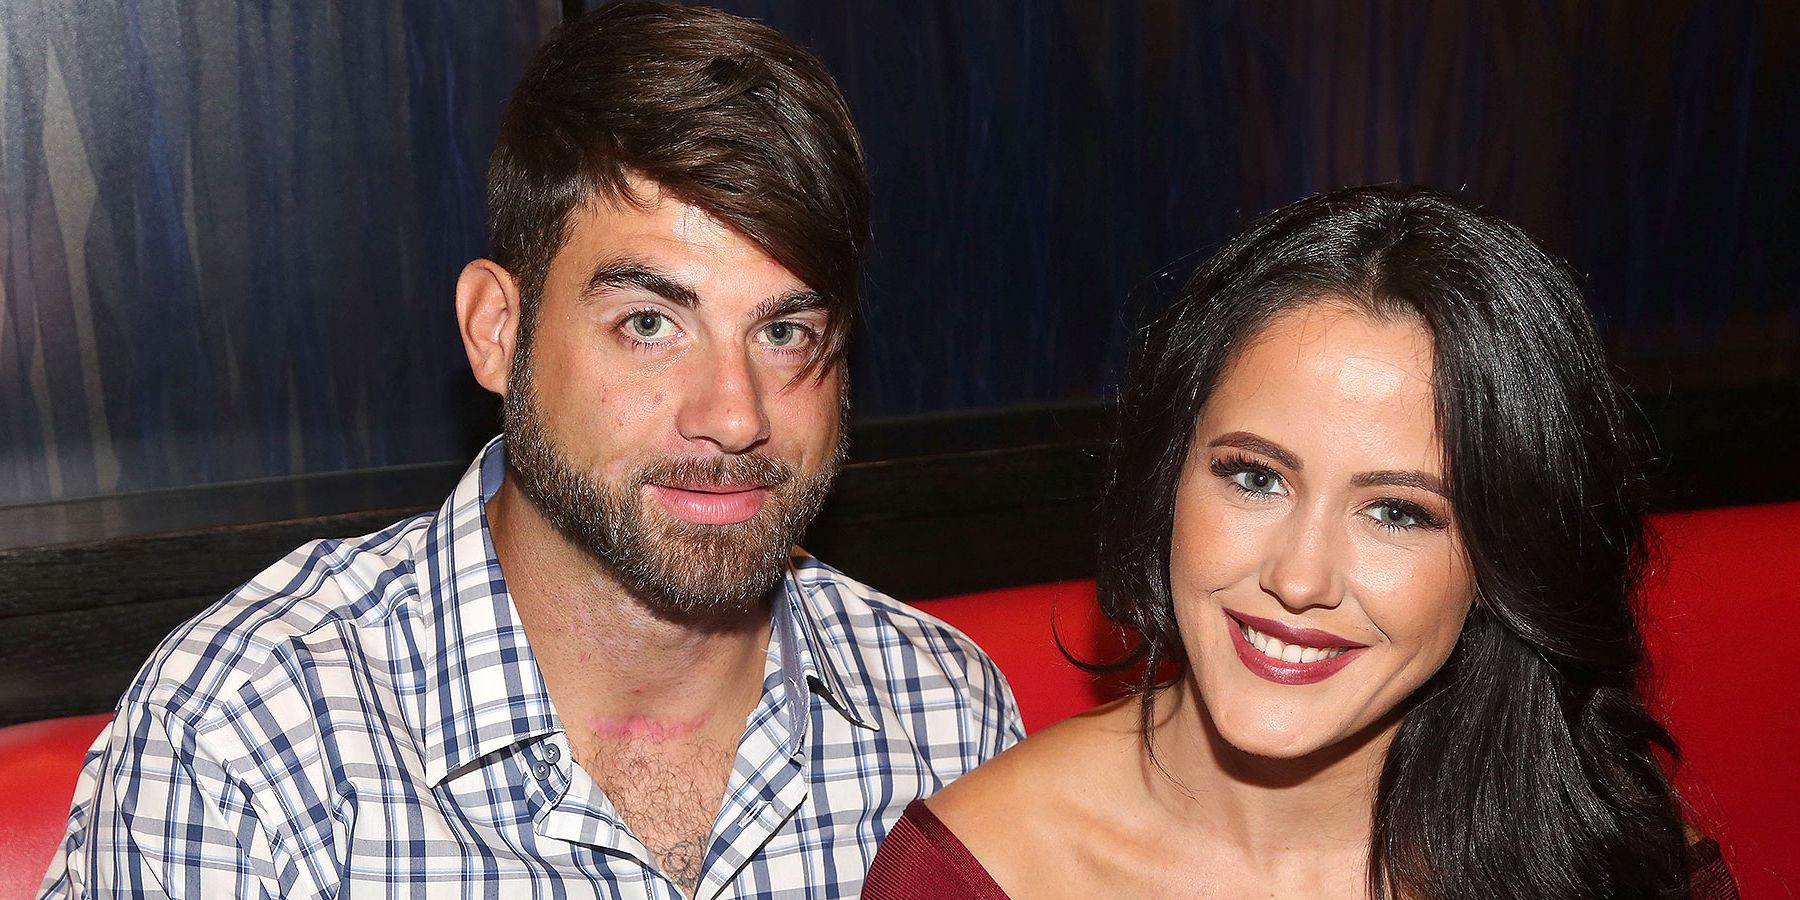 Teen Mom's Jenelle Evans and David Eason smiling on red couch